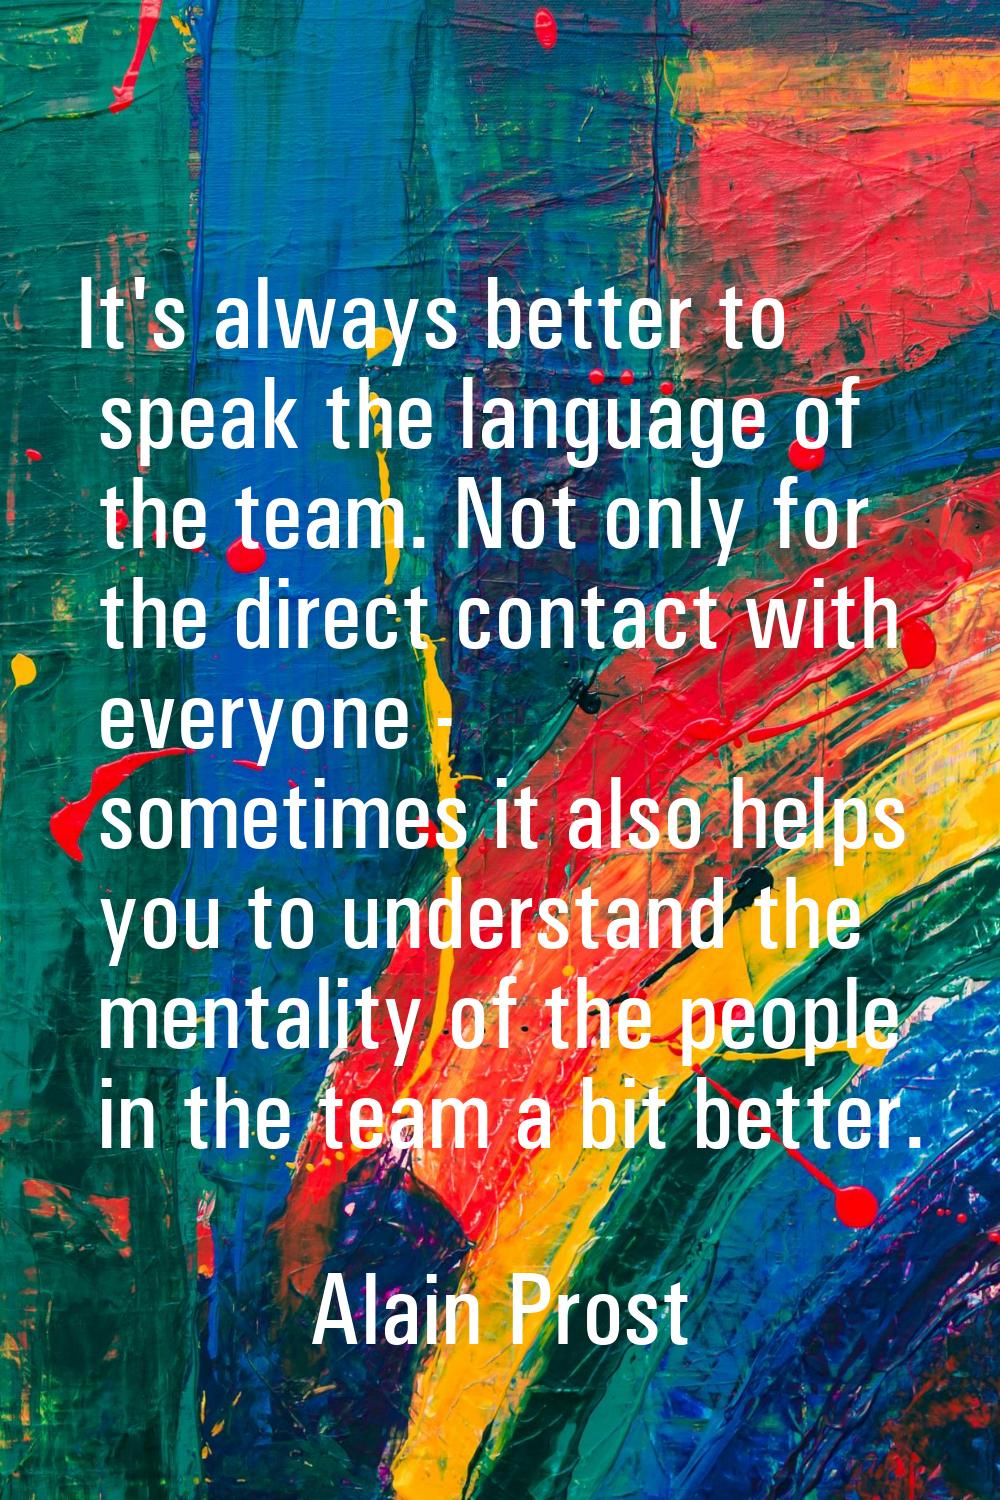 It's always better to speak the language of the team. Not only for the direct contact with everyone